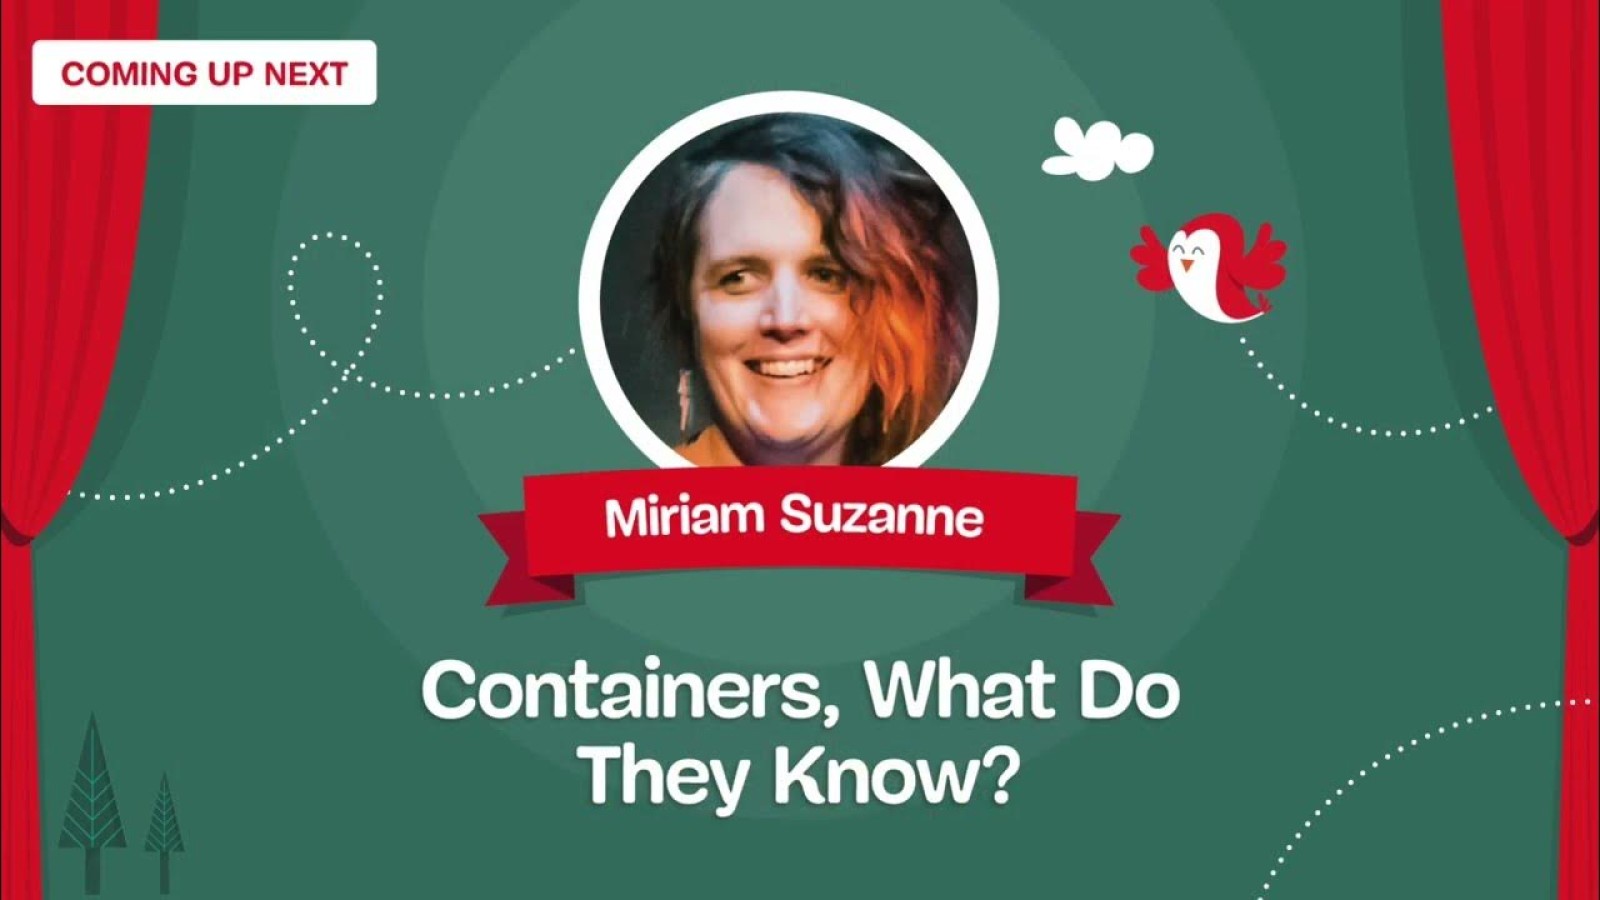 CSS Containers, What Do They Know?